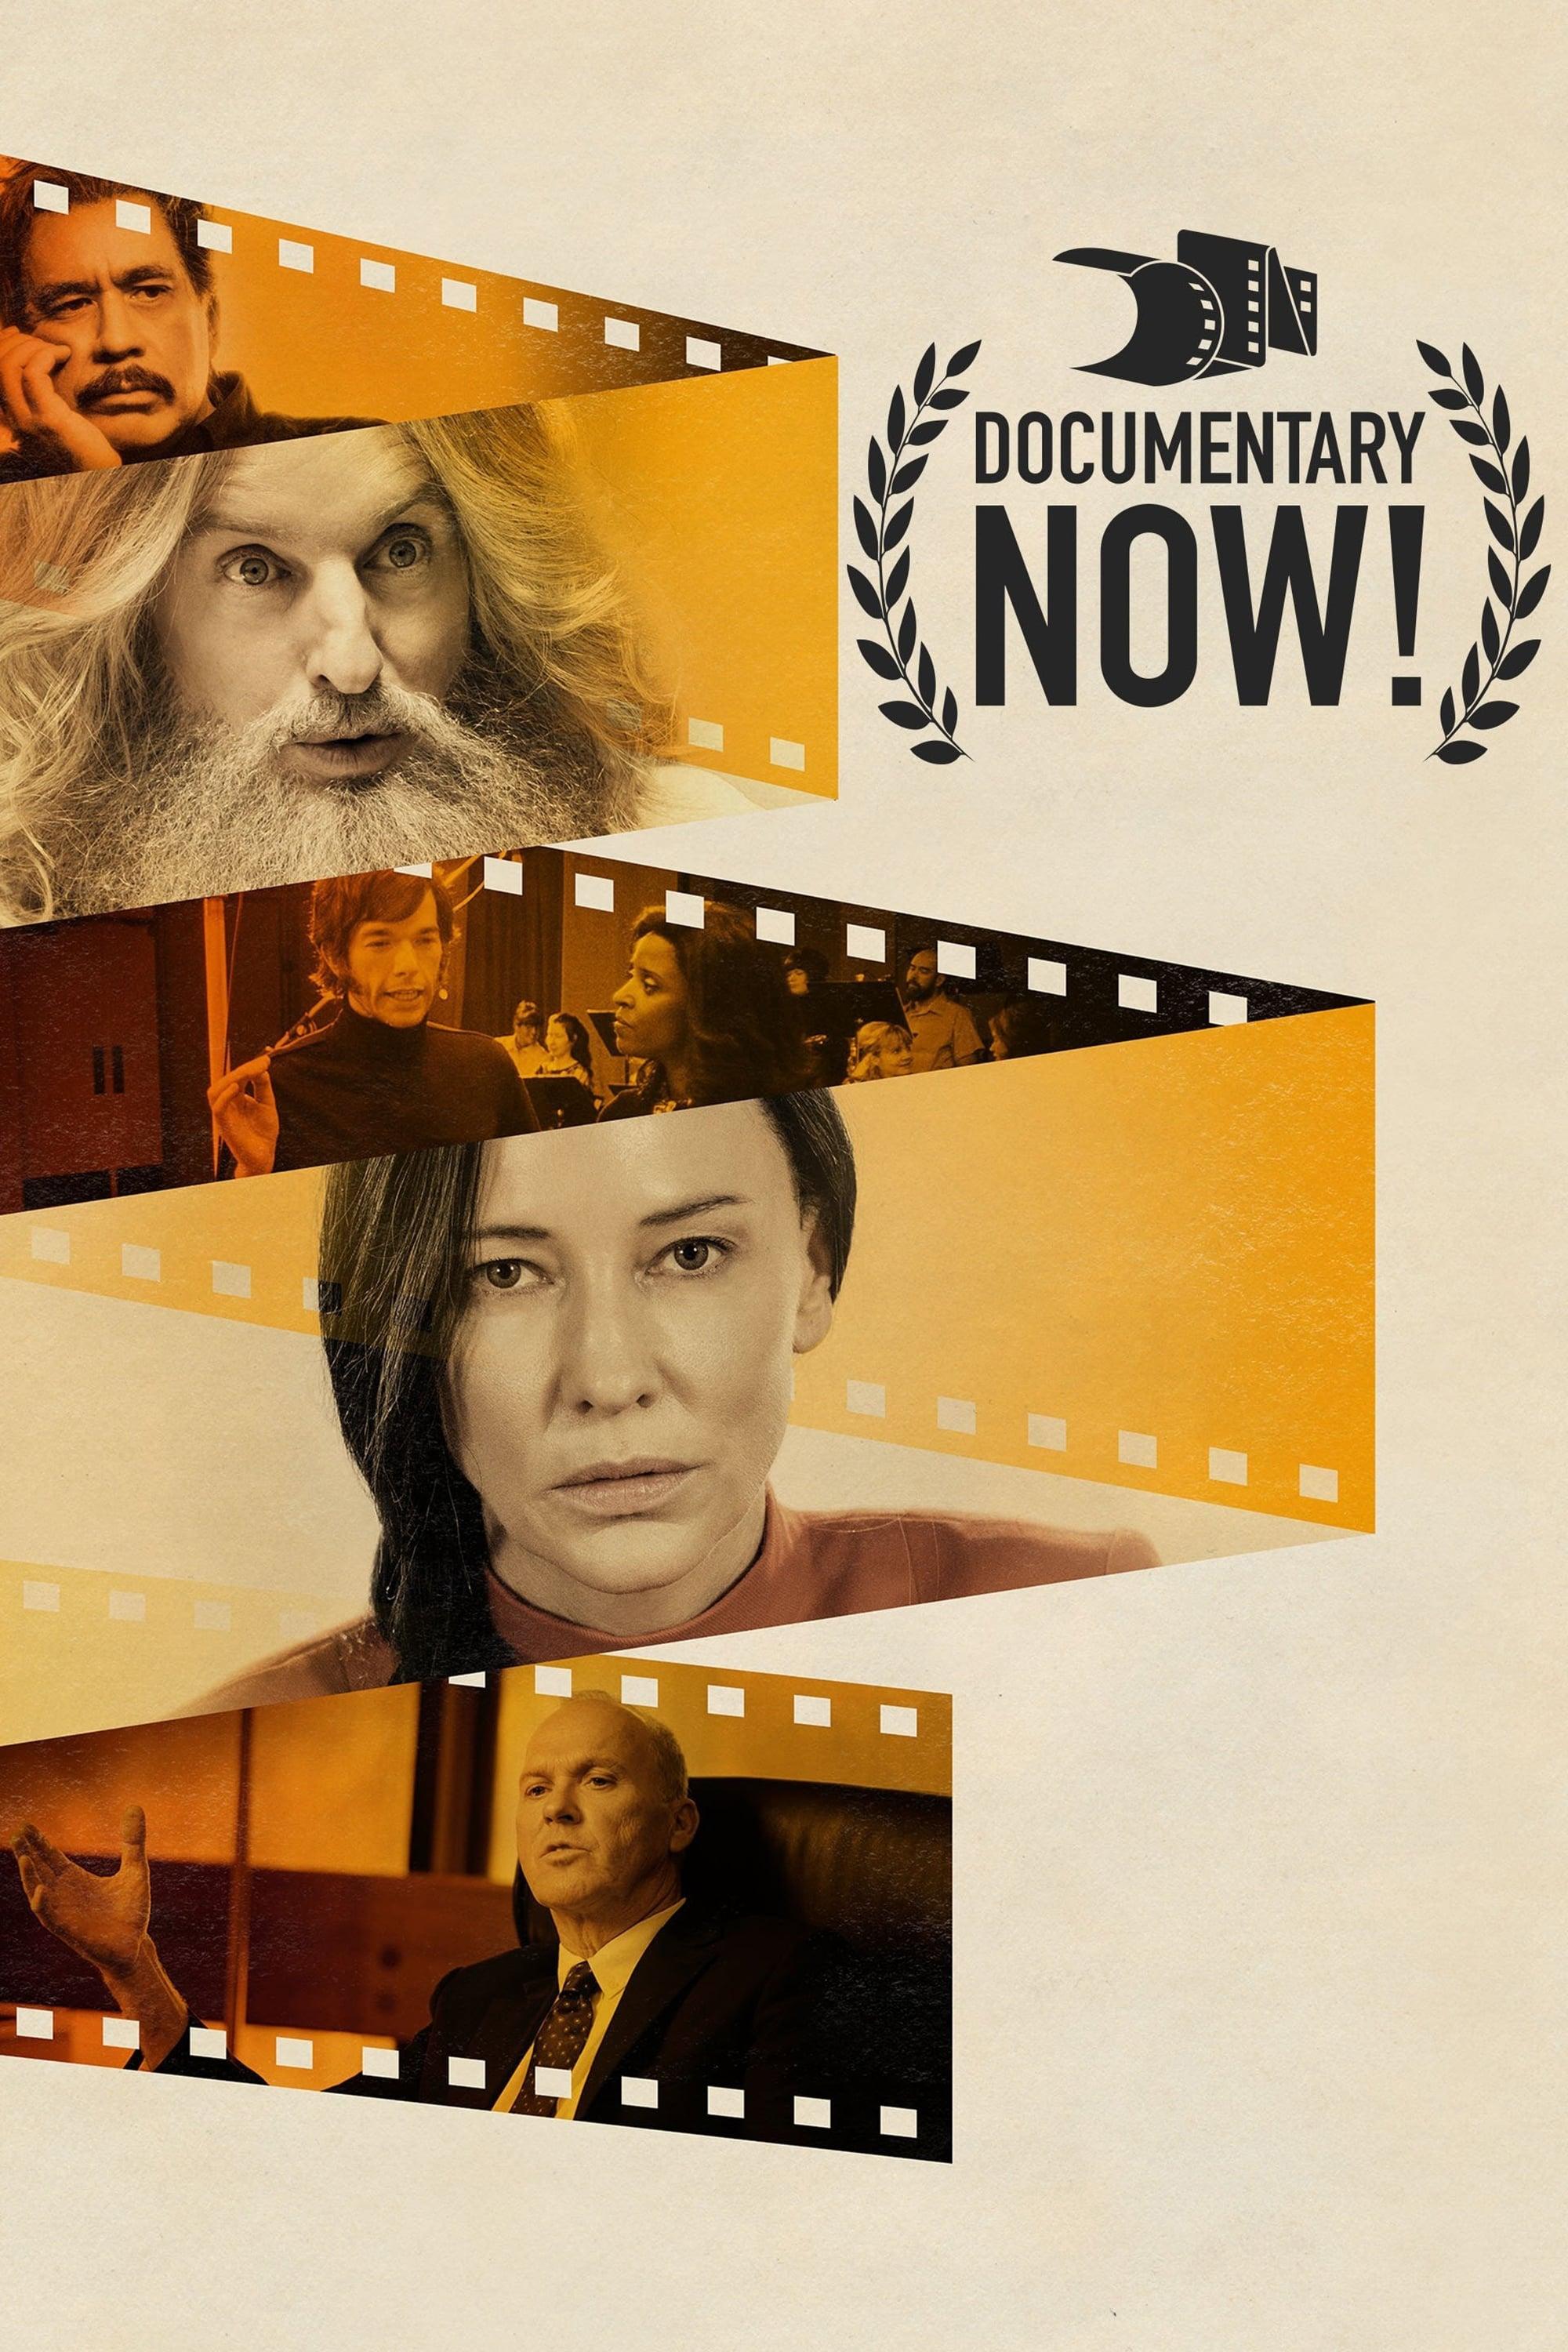 Documentary Now! poster